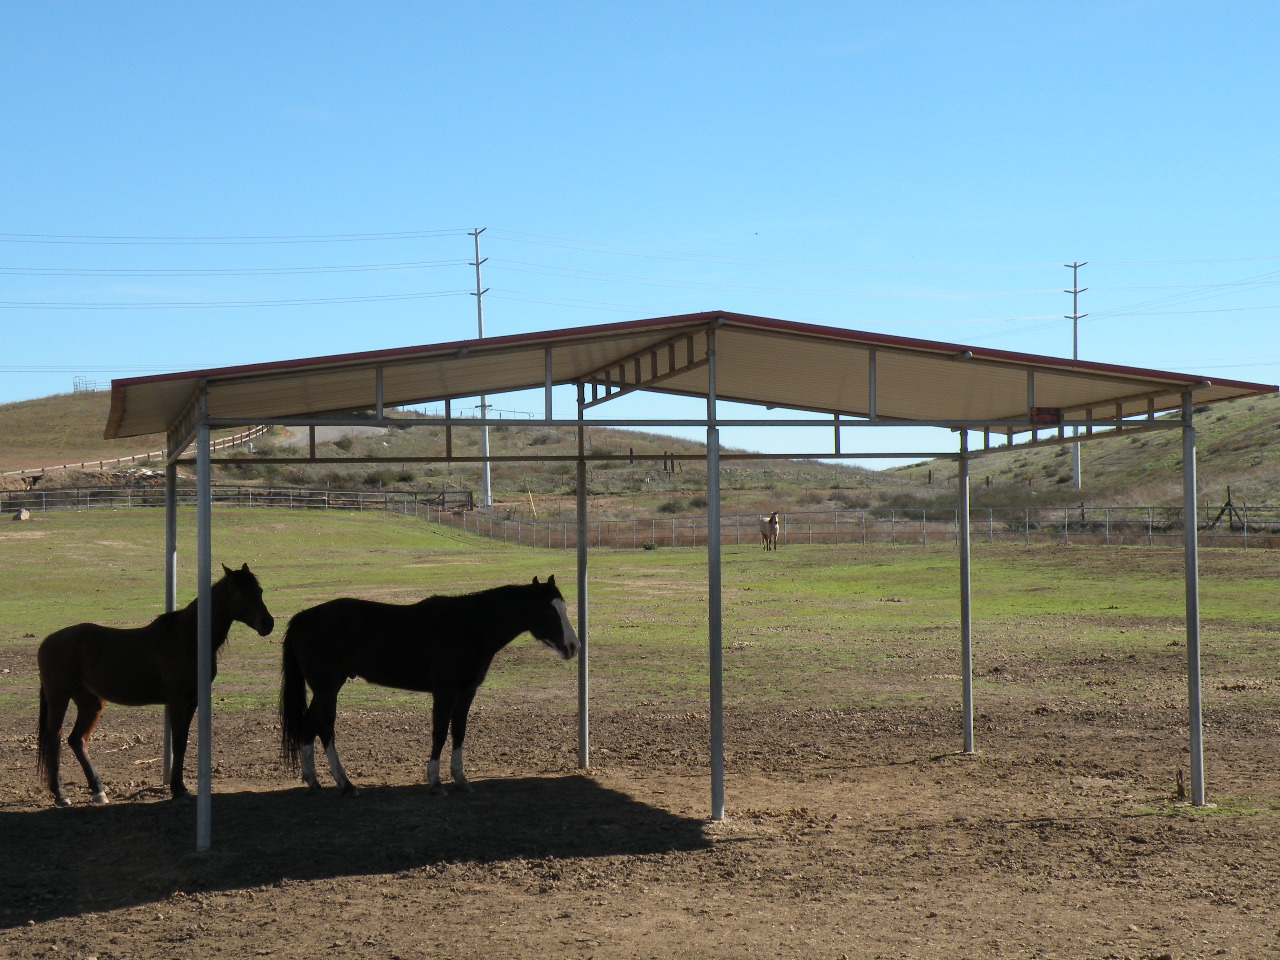 Two horses standing under a shelter in the middle of an open field.